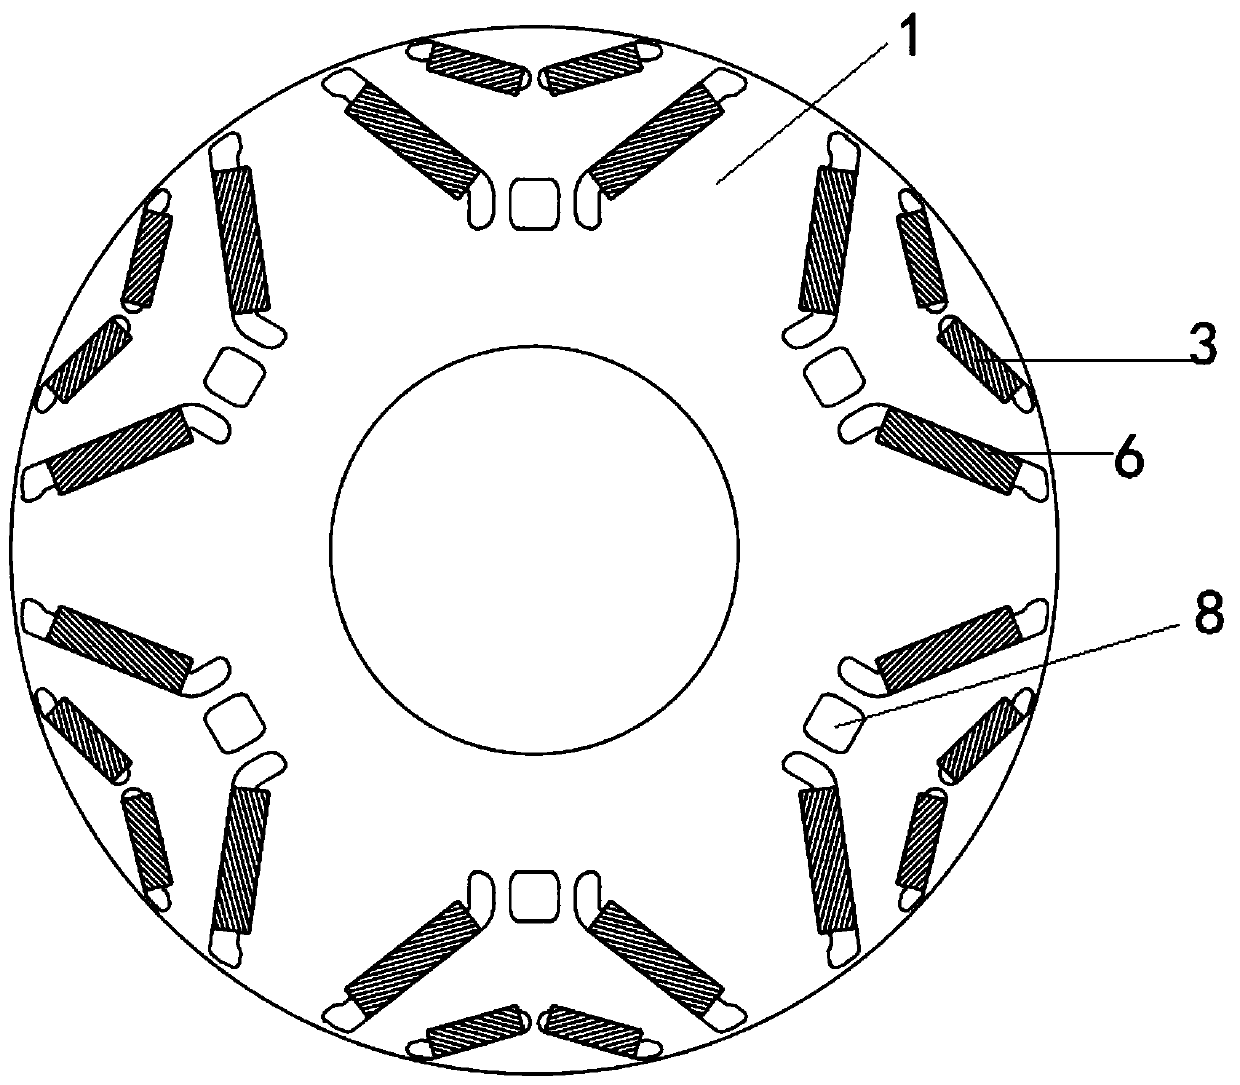 Permanent magnet motor rotor for automobile